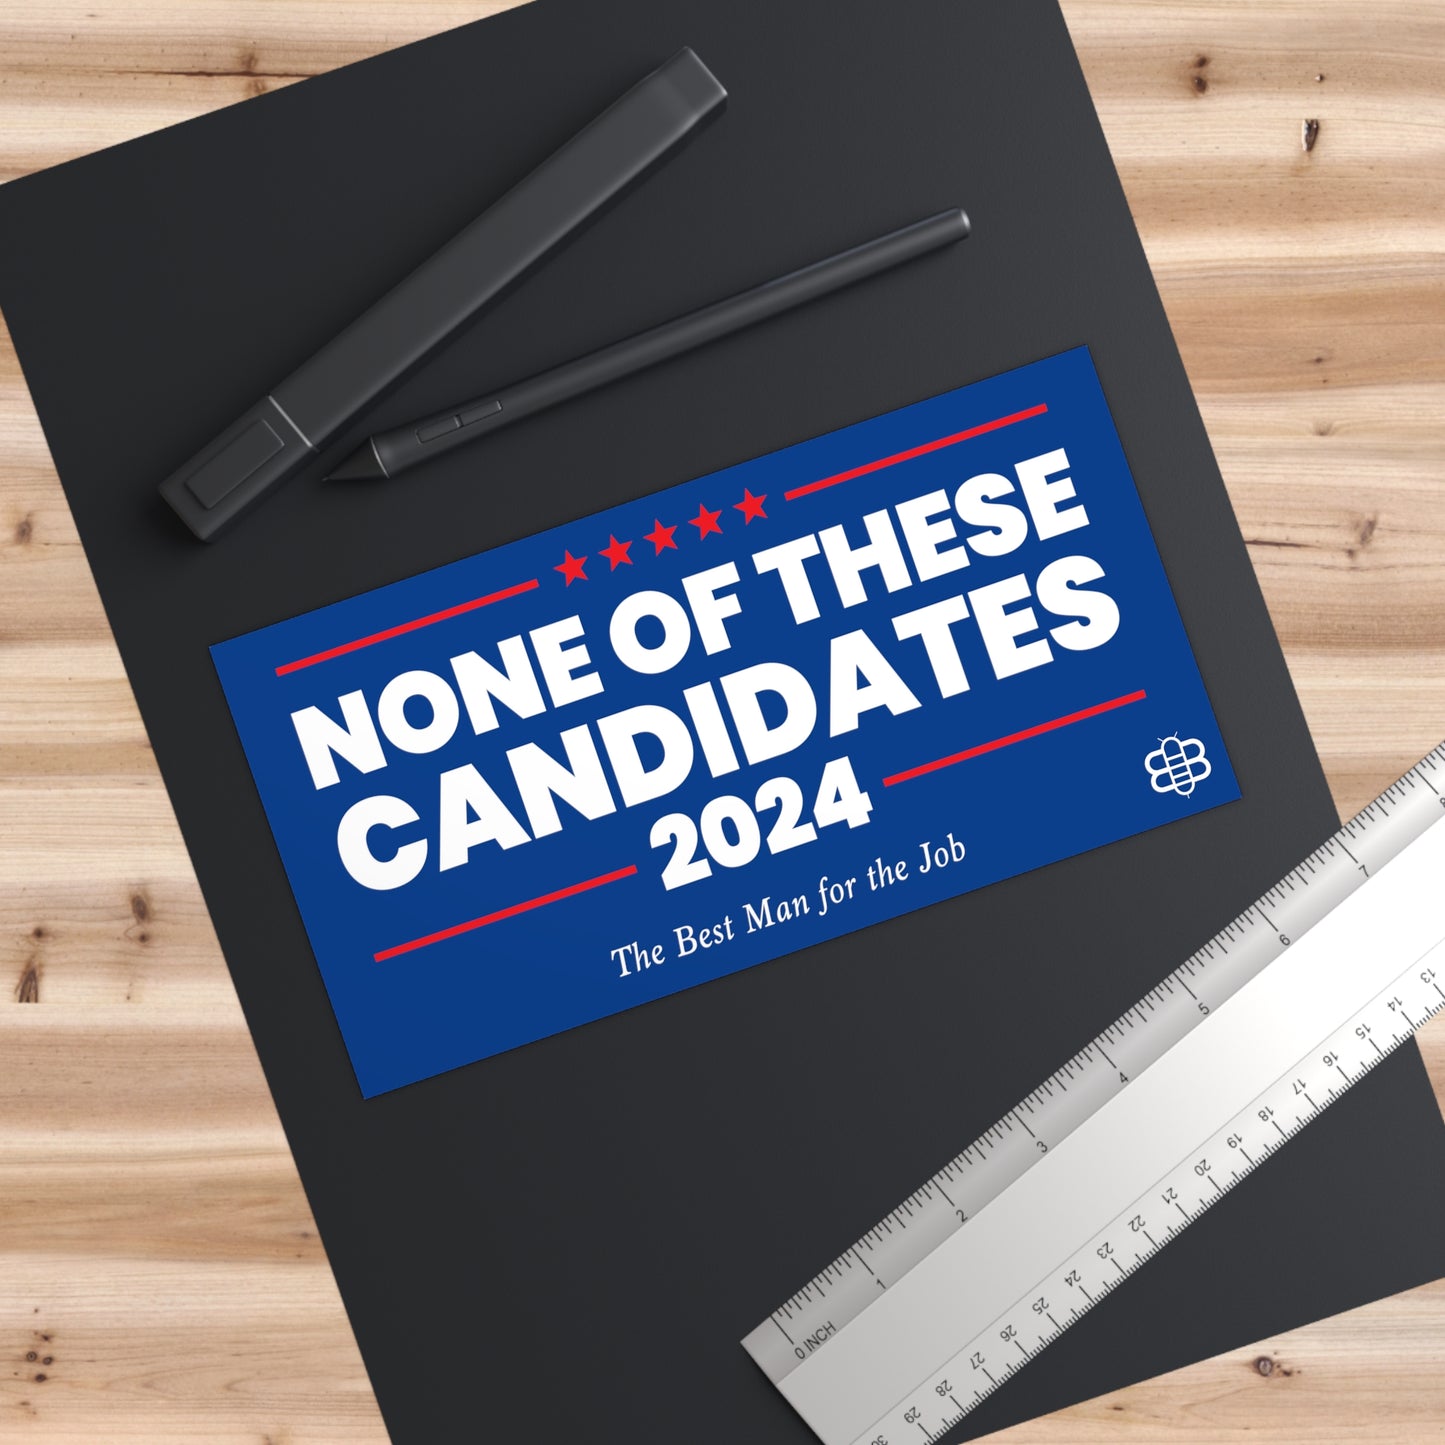 None of These Candidates Bumper Stickers